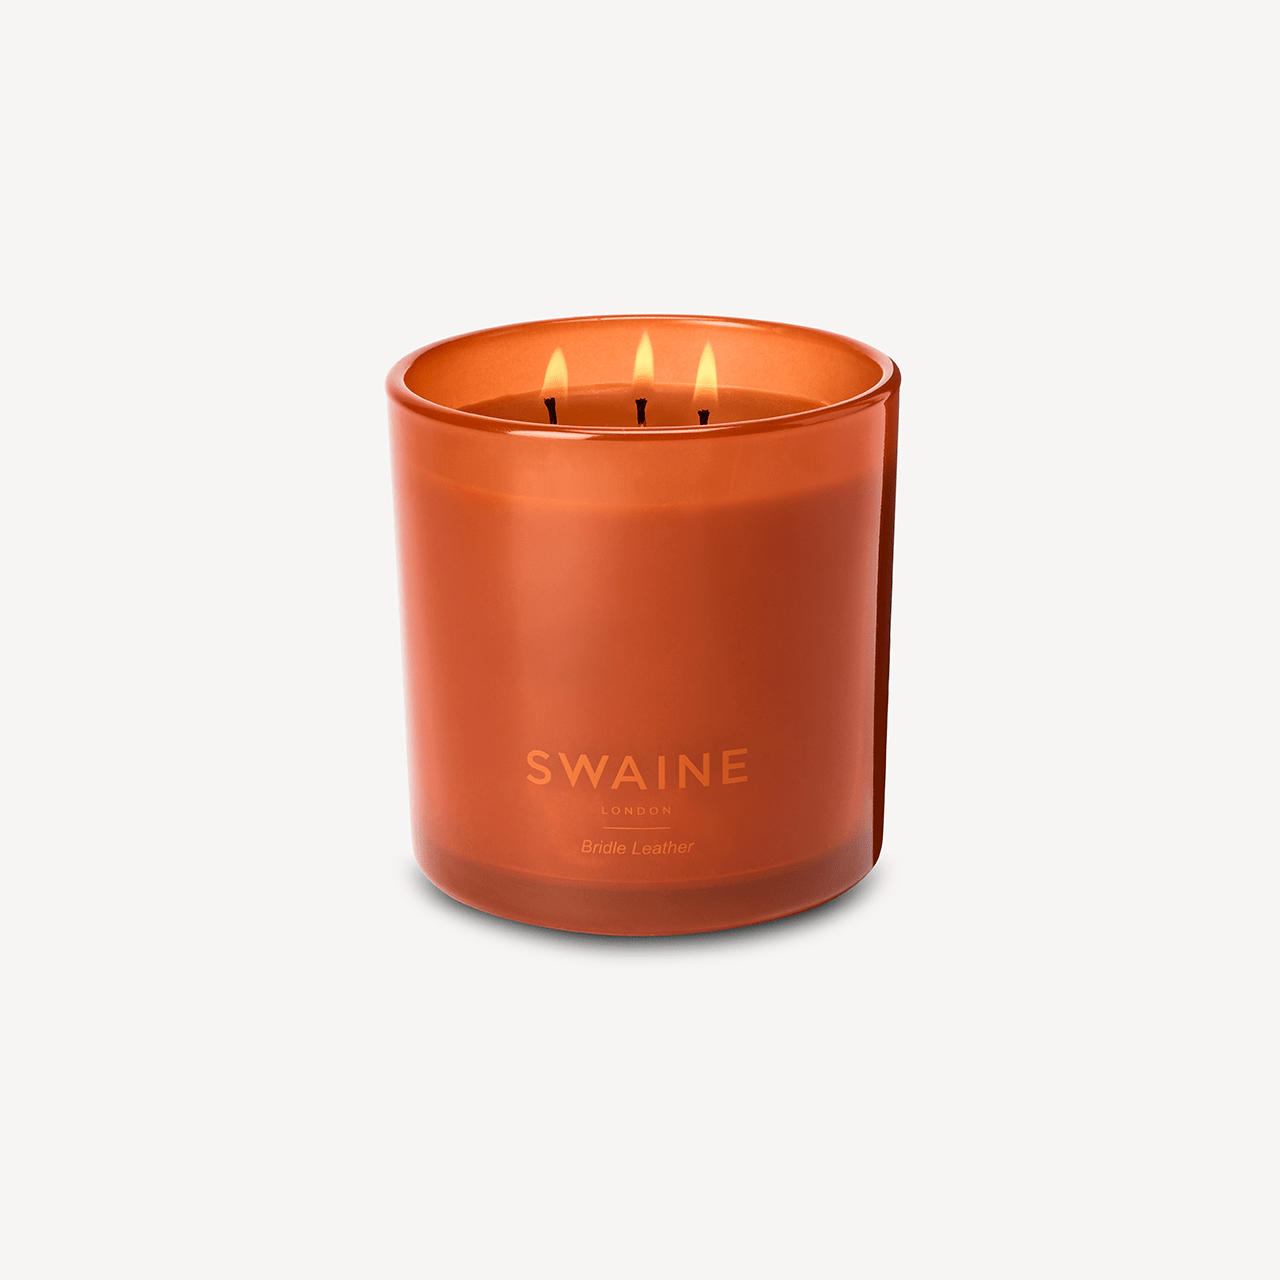 Candle Bridle Leather - Vegetal Wax - Swaine